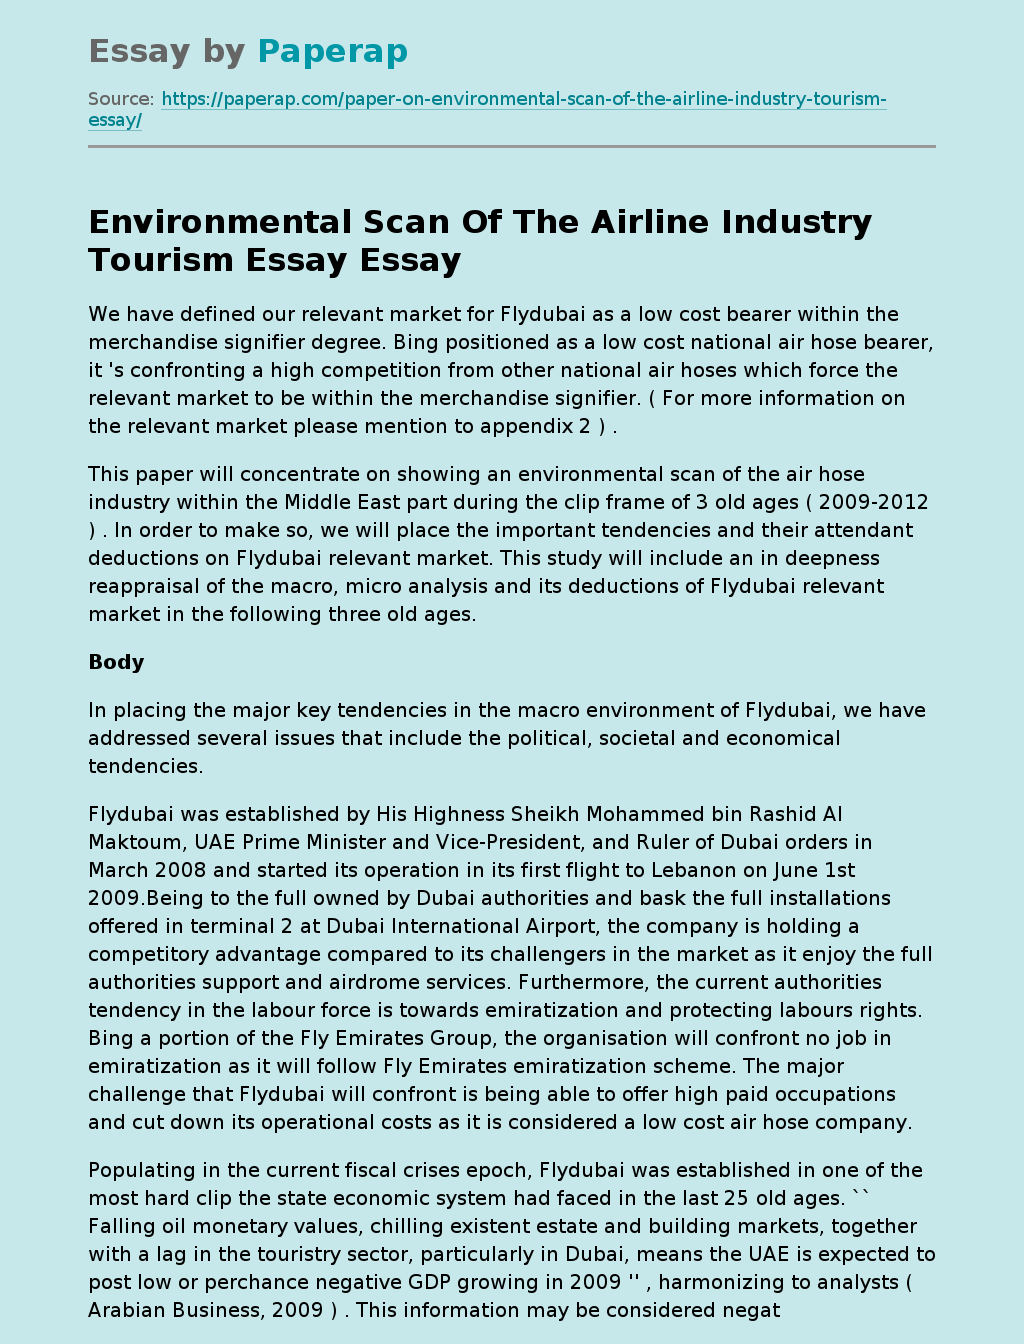 Environmental Scan Of The Airline Industry Tourism Essay